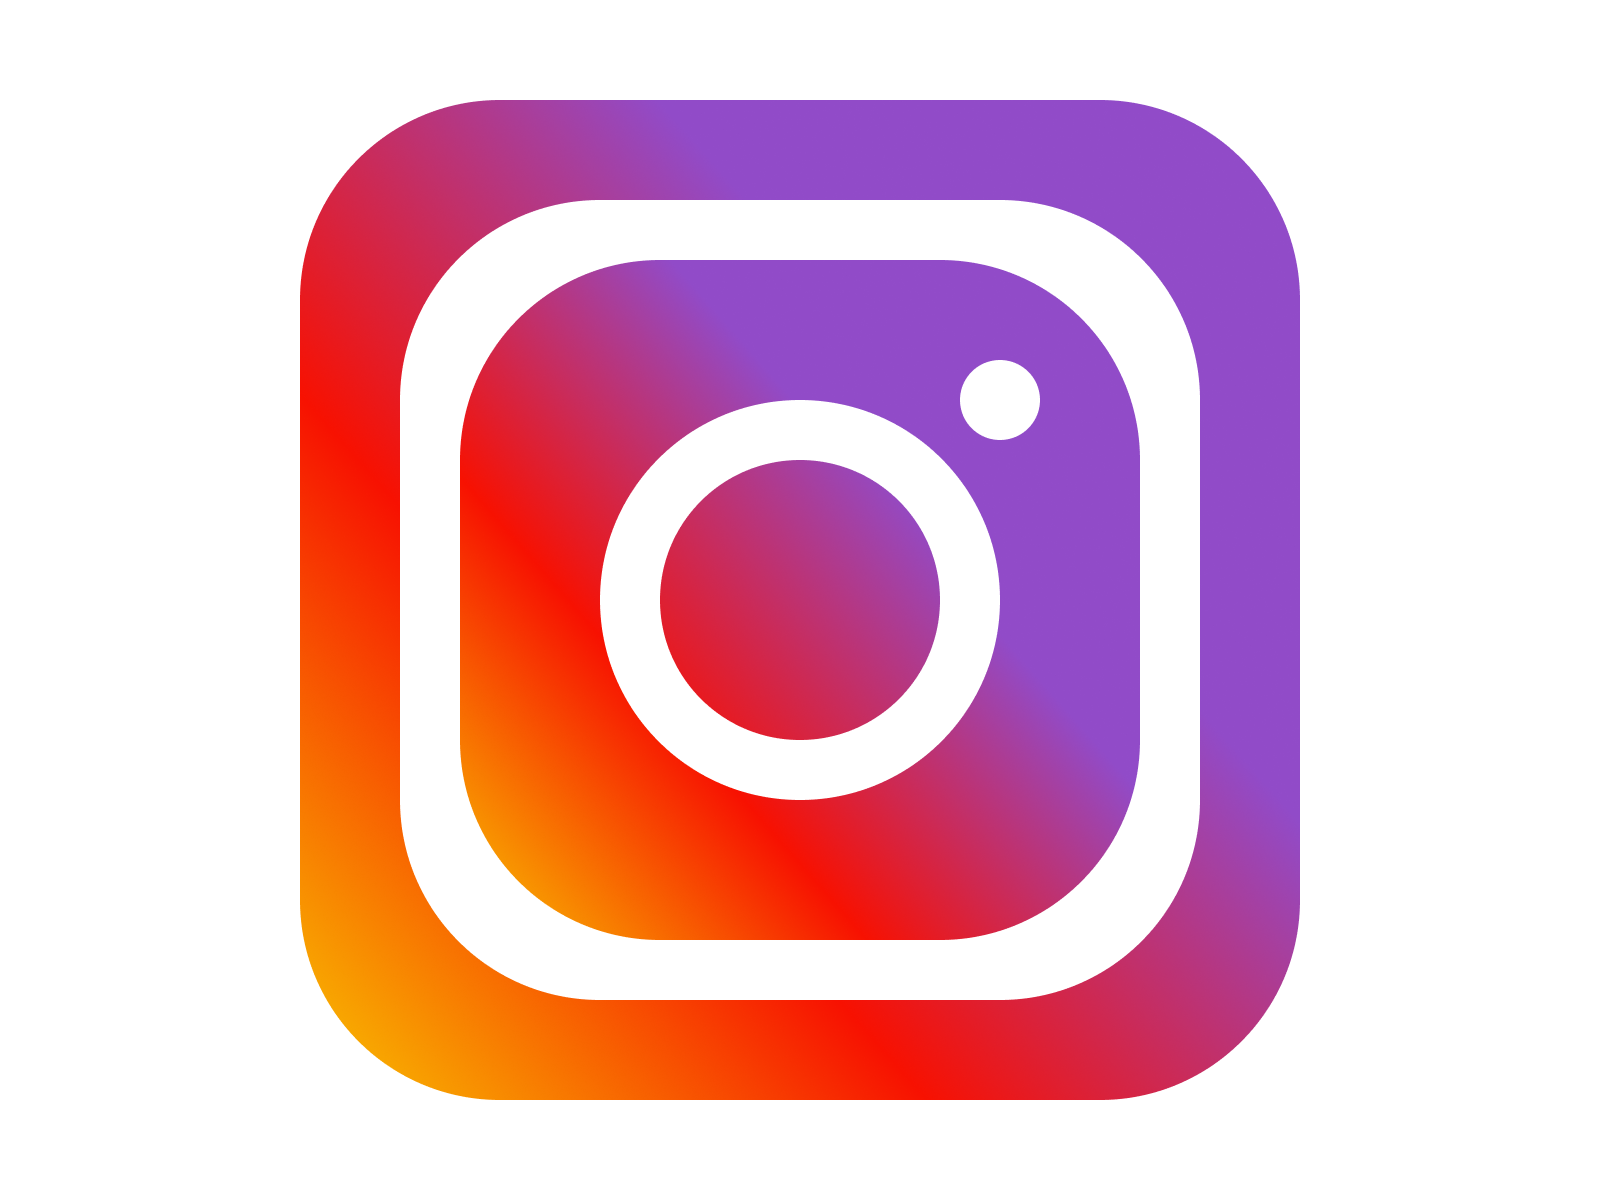 Instagram App Icon Redesigned by Precious Ukachukwu on Dribbble